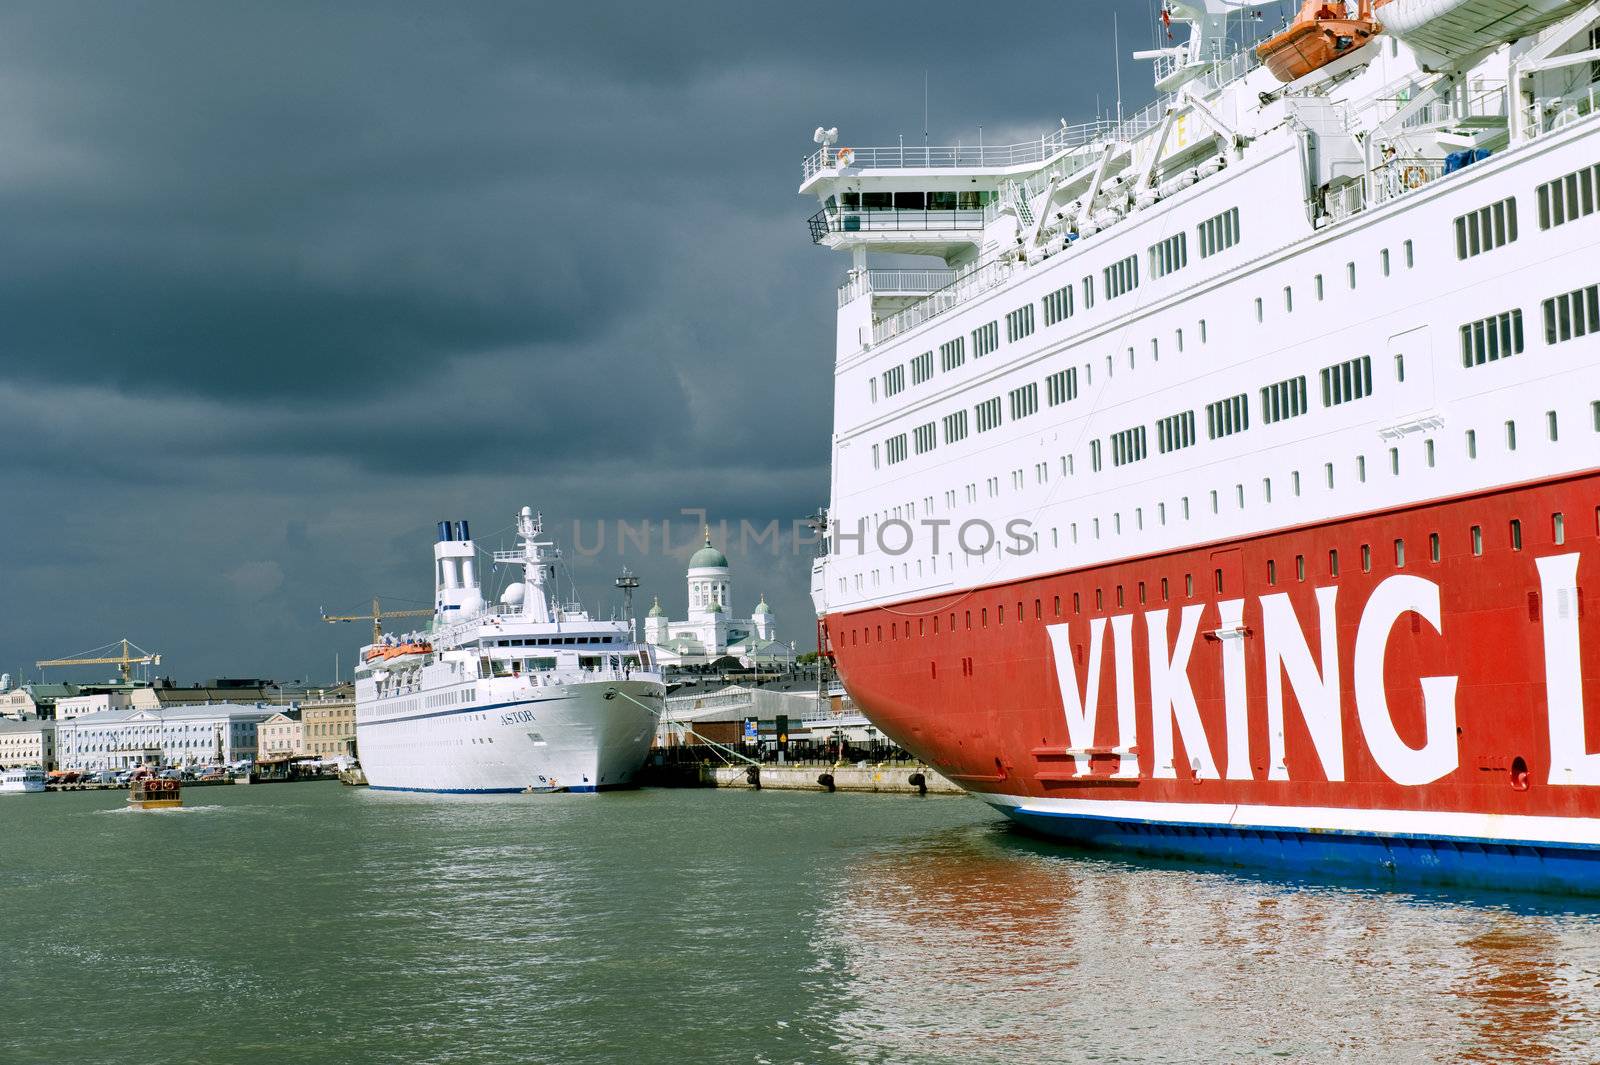 Cruise ship Viking Line in the port of Helsinki, Finland